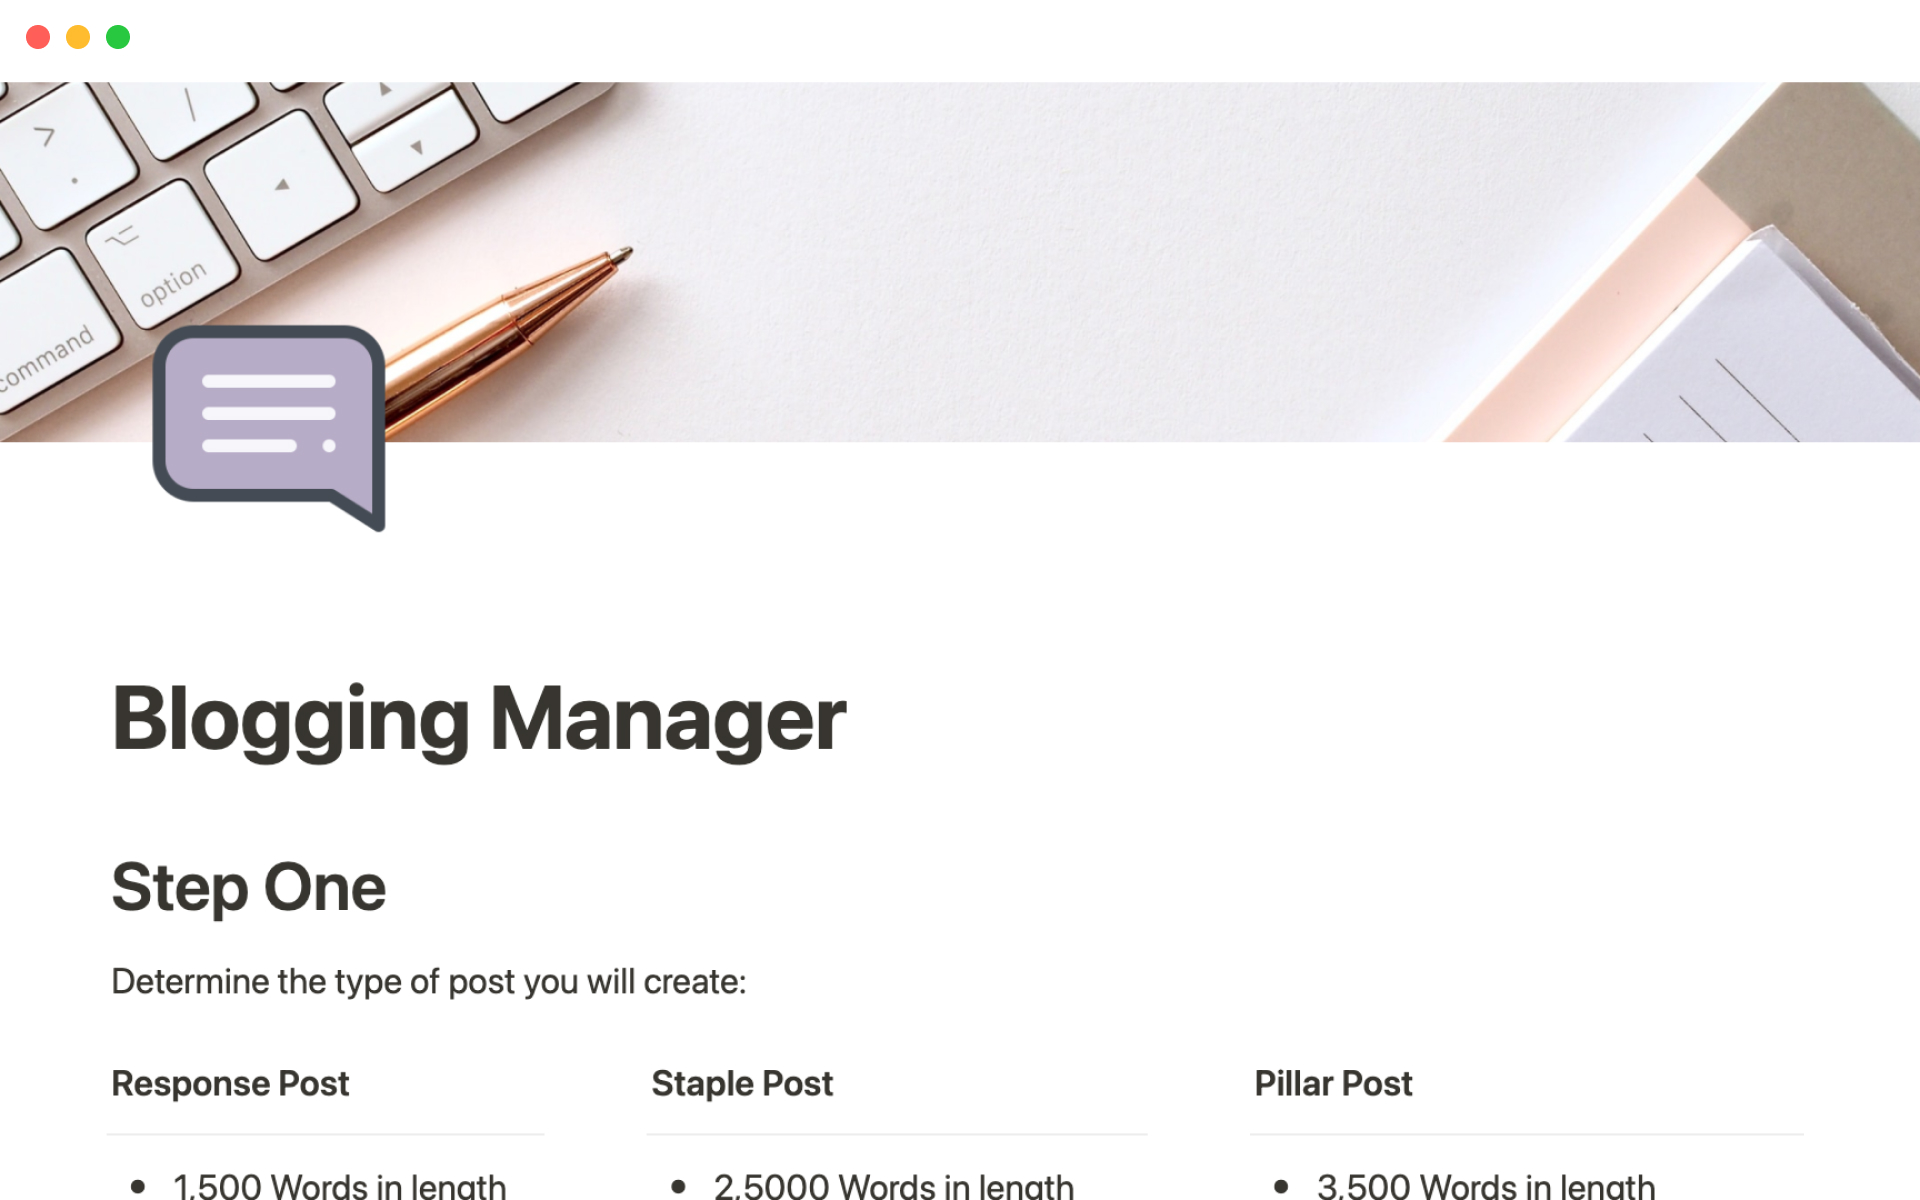 The desktop image for the Blogging manager template